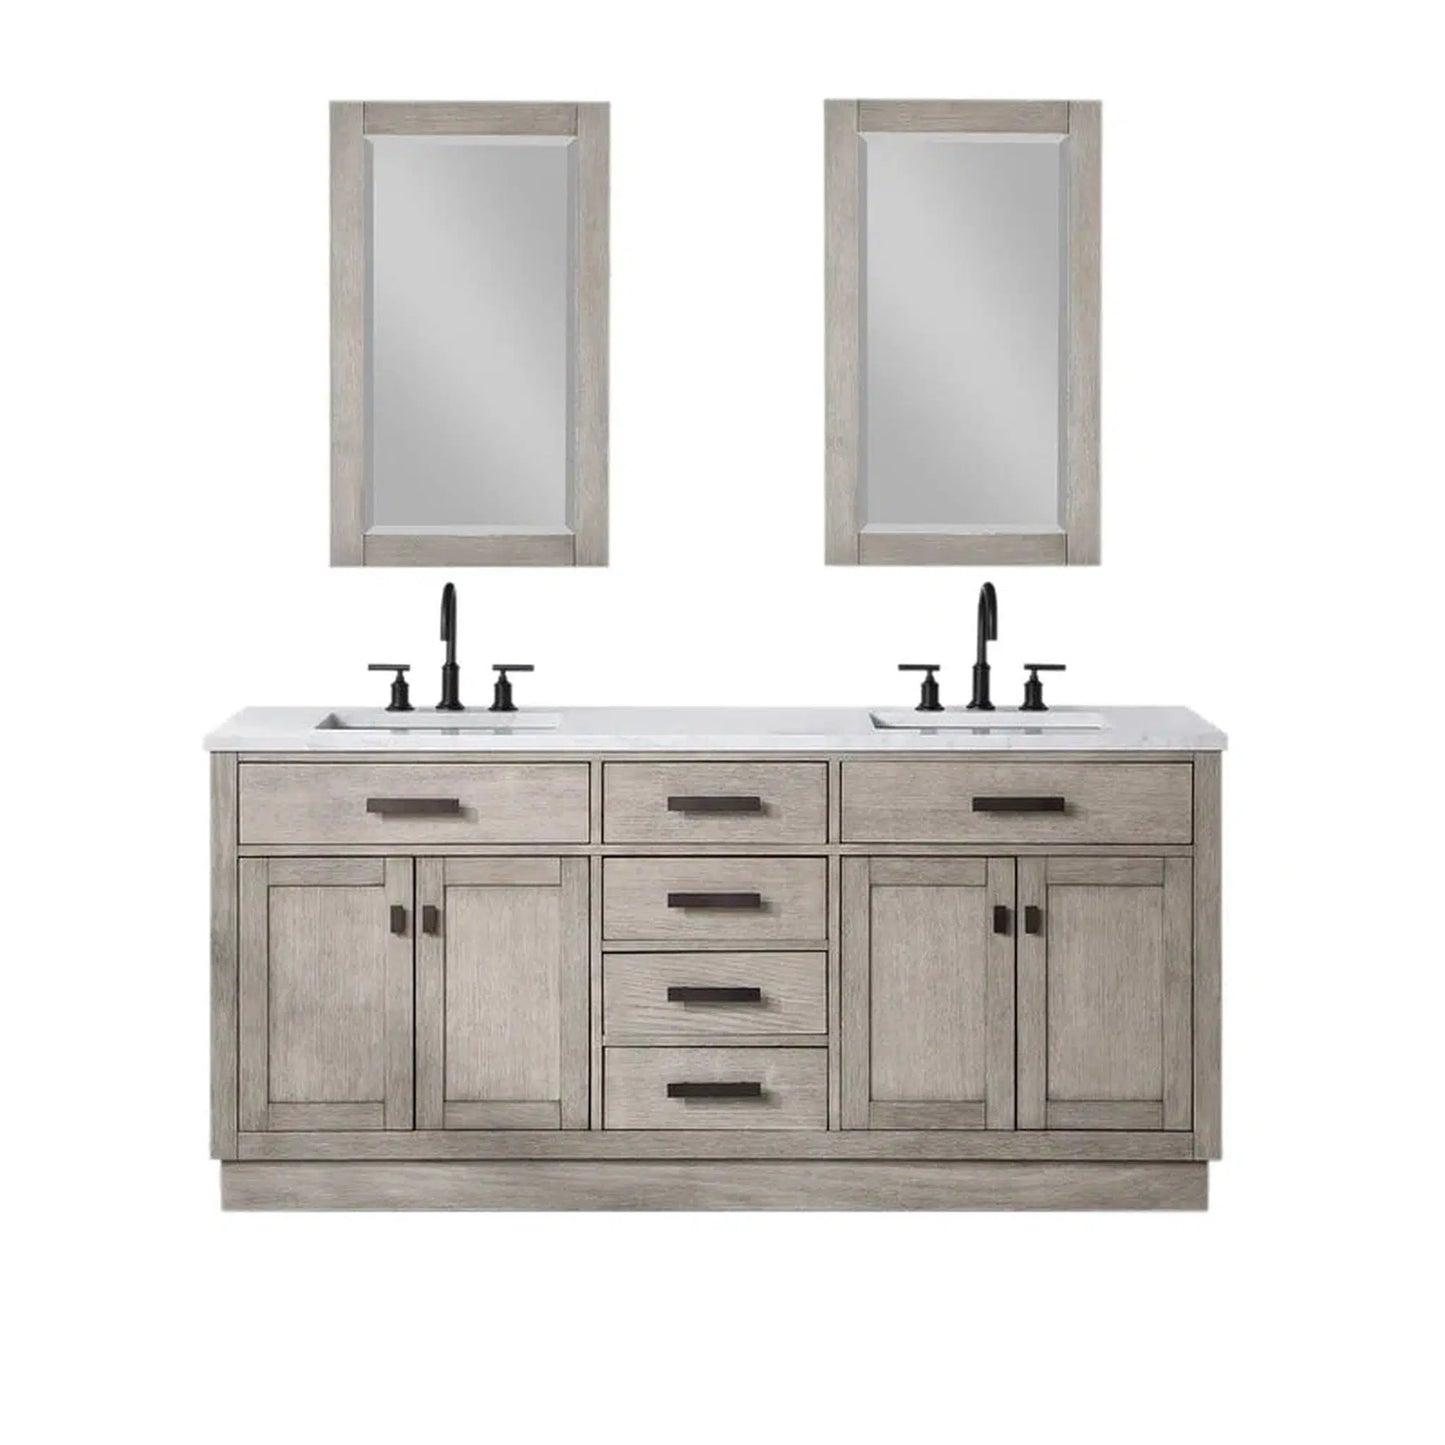 Water Creation Chestnut 72" Double Sink Carrara White Marble Countertop Vanity In Grey Oak with Grooseneck Faucets